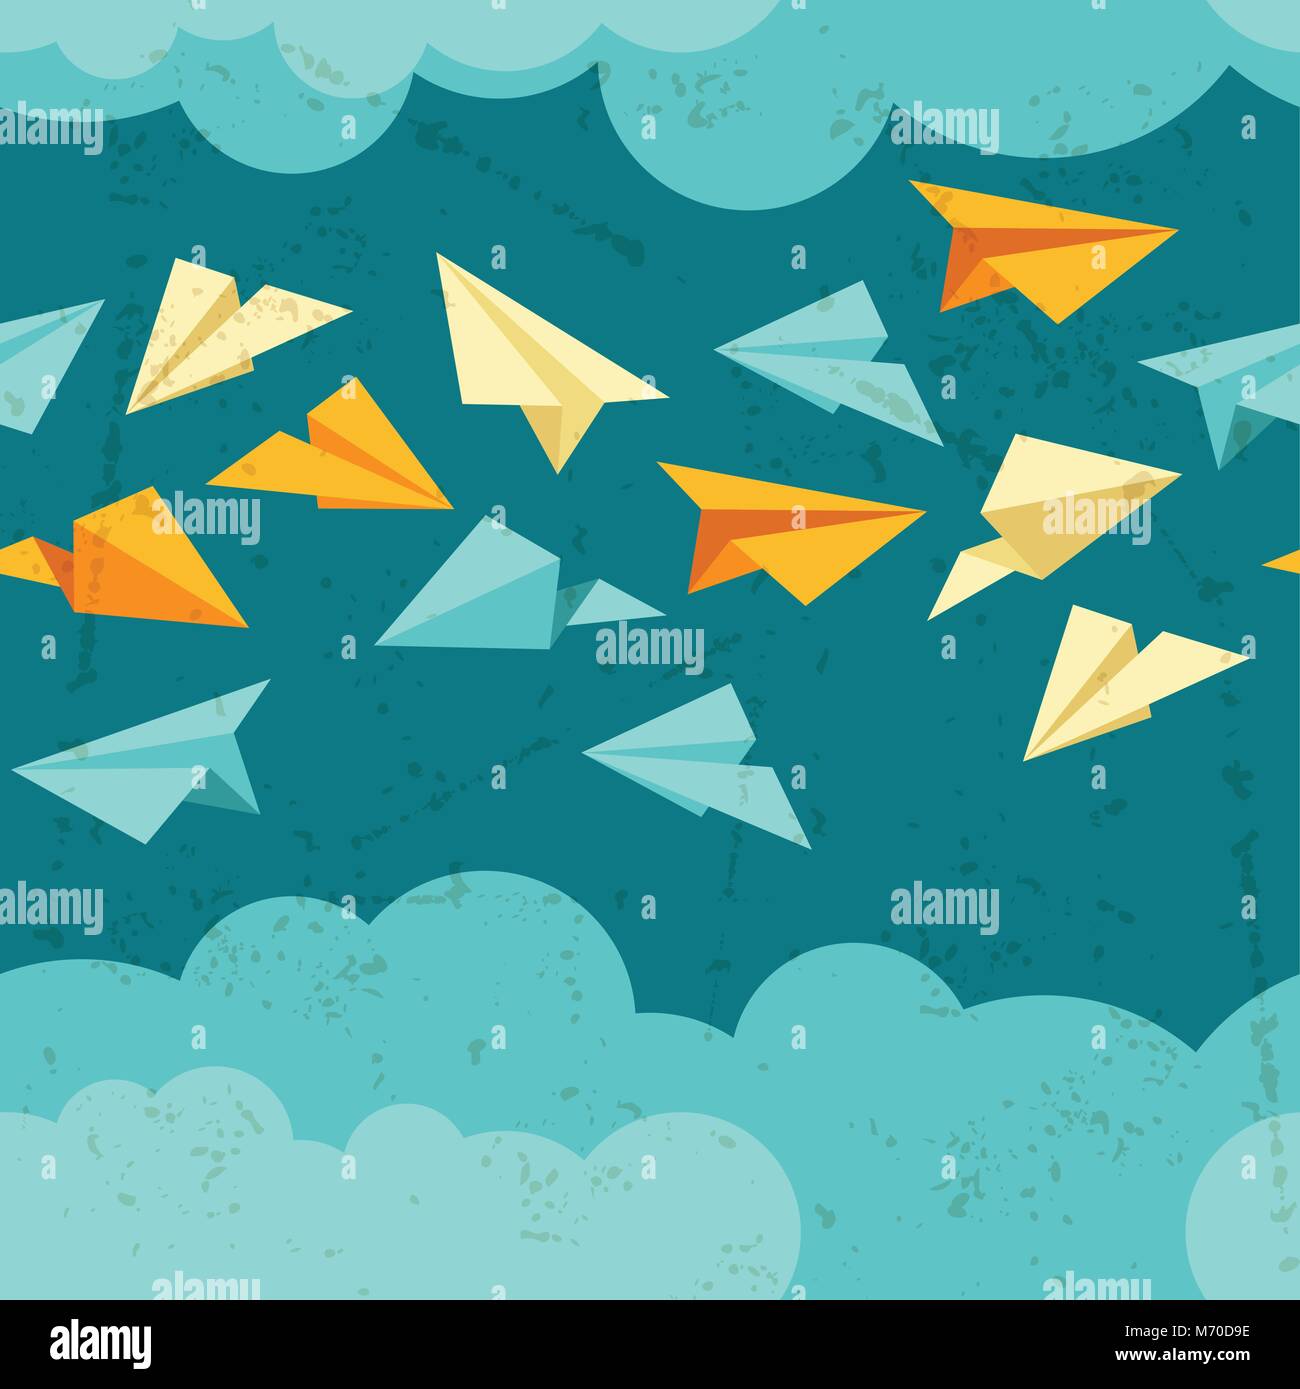 Seamless pattern of paper planes on the sky with clouds Stock Vector